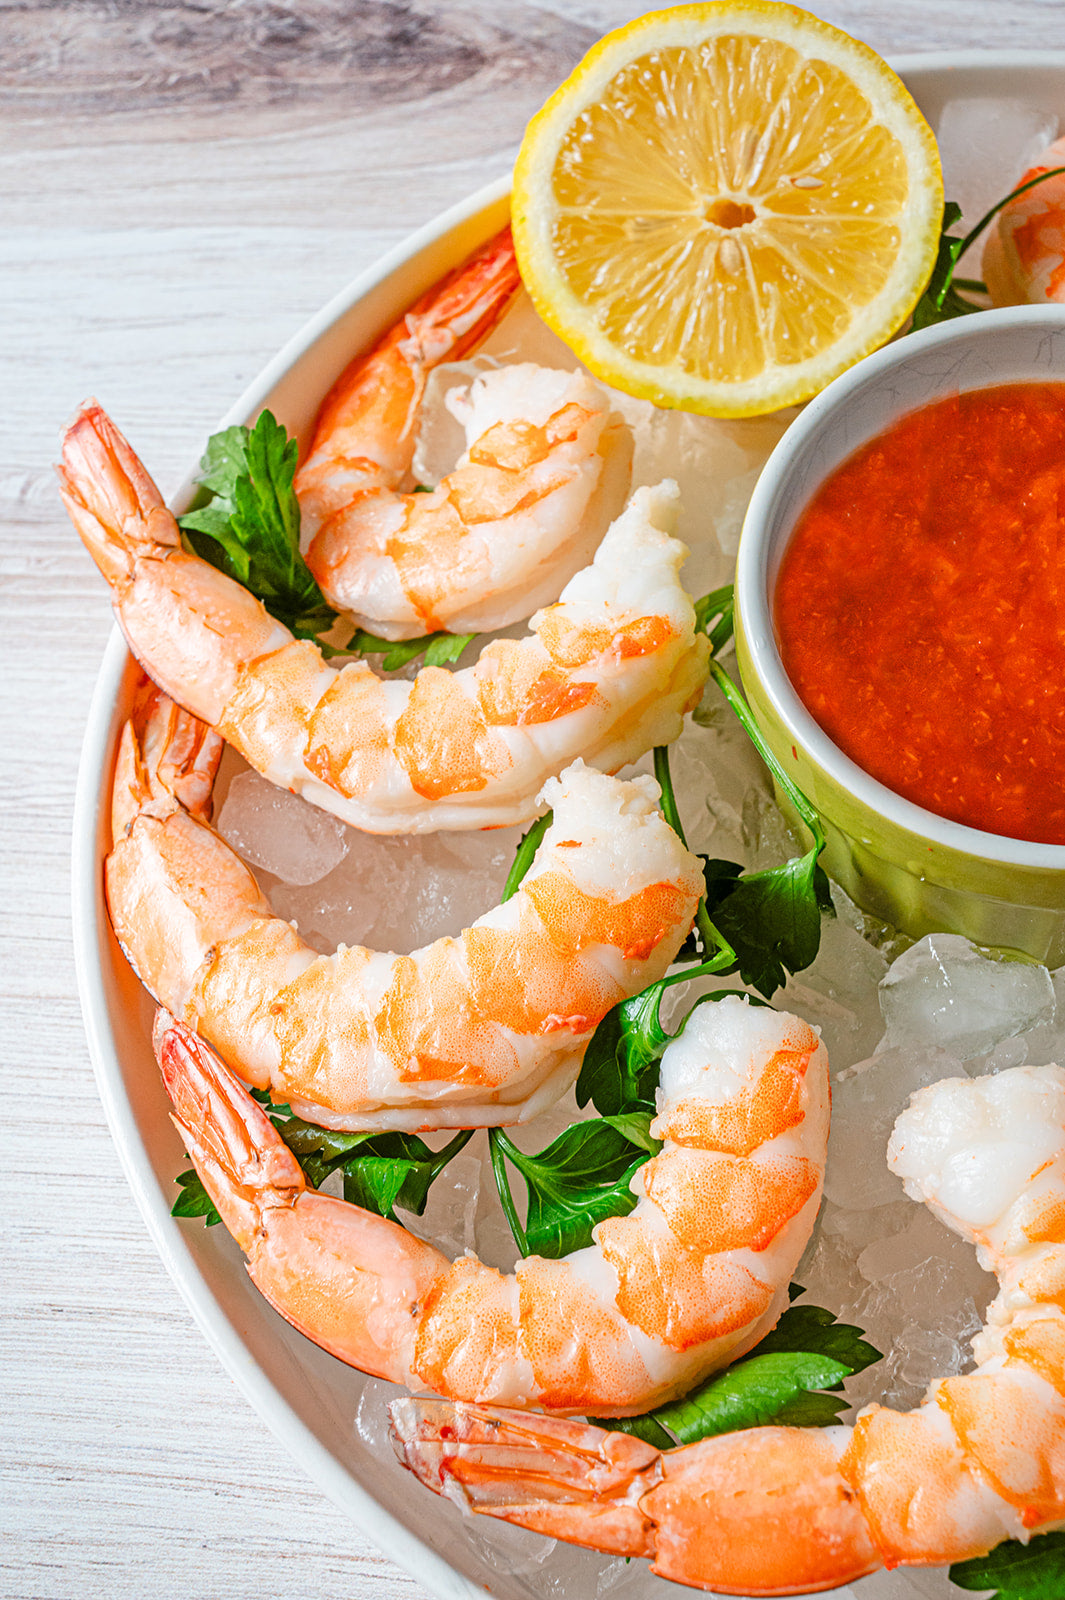 Steamed Jumbo Shrimp with Cocktail Sauce and Remoulade (1 lb)